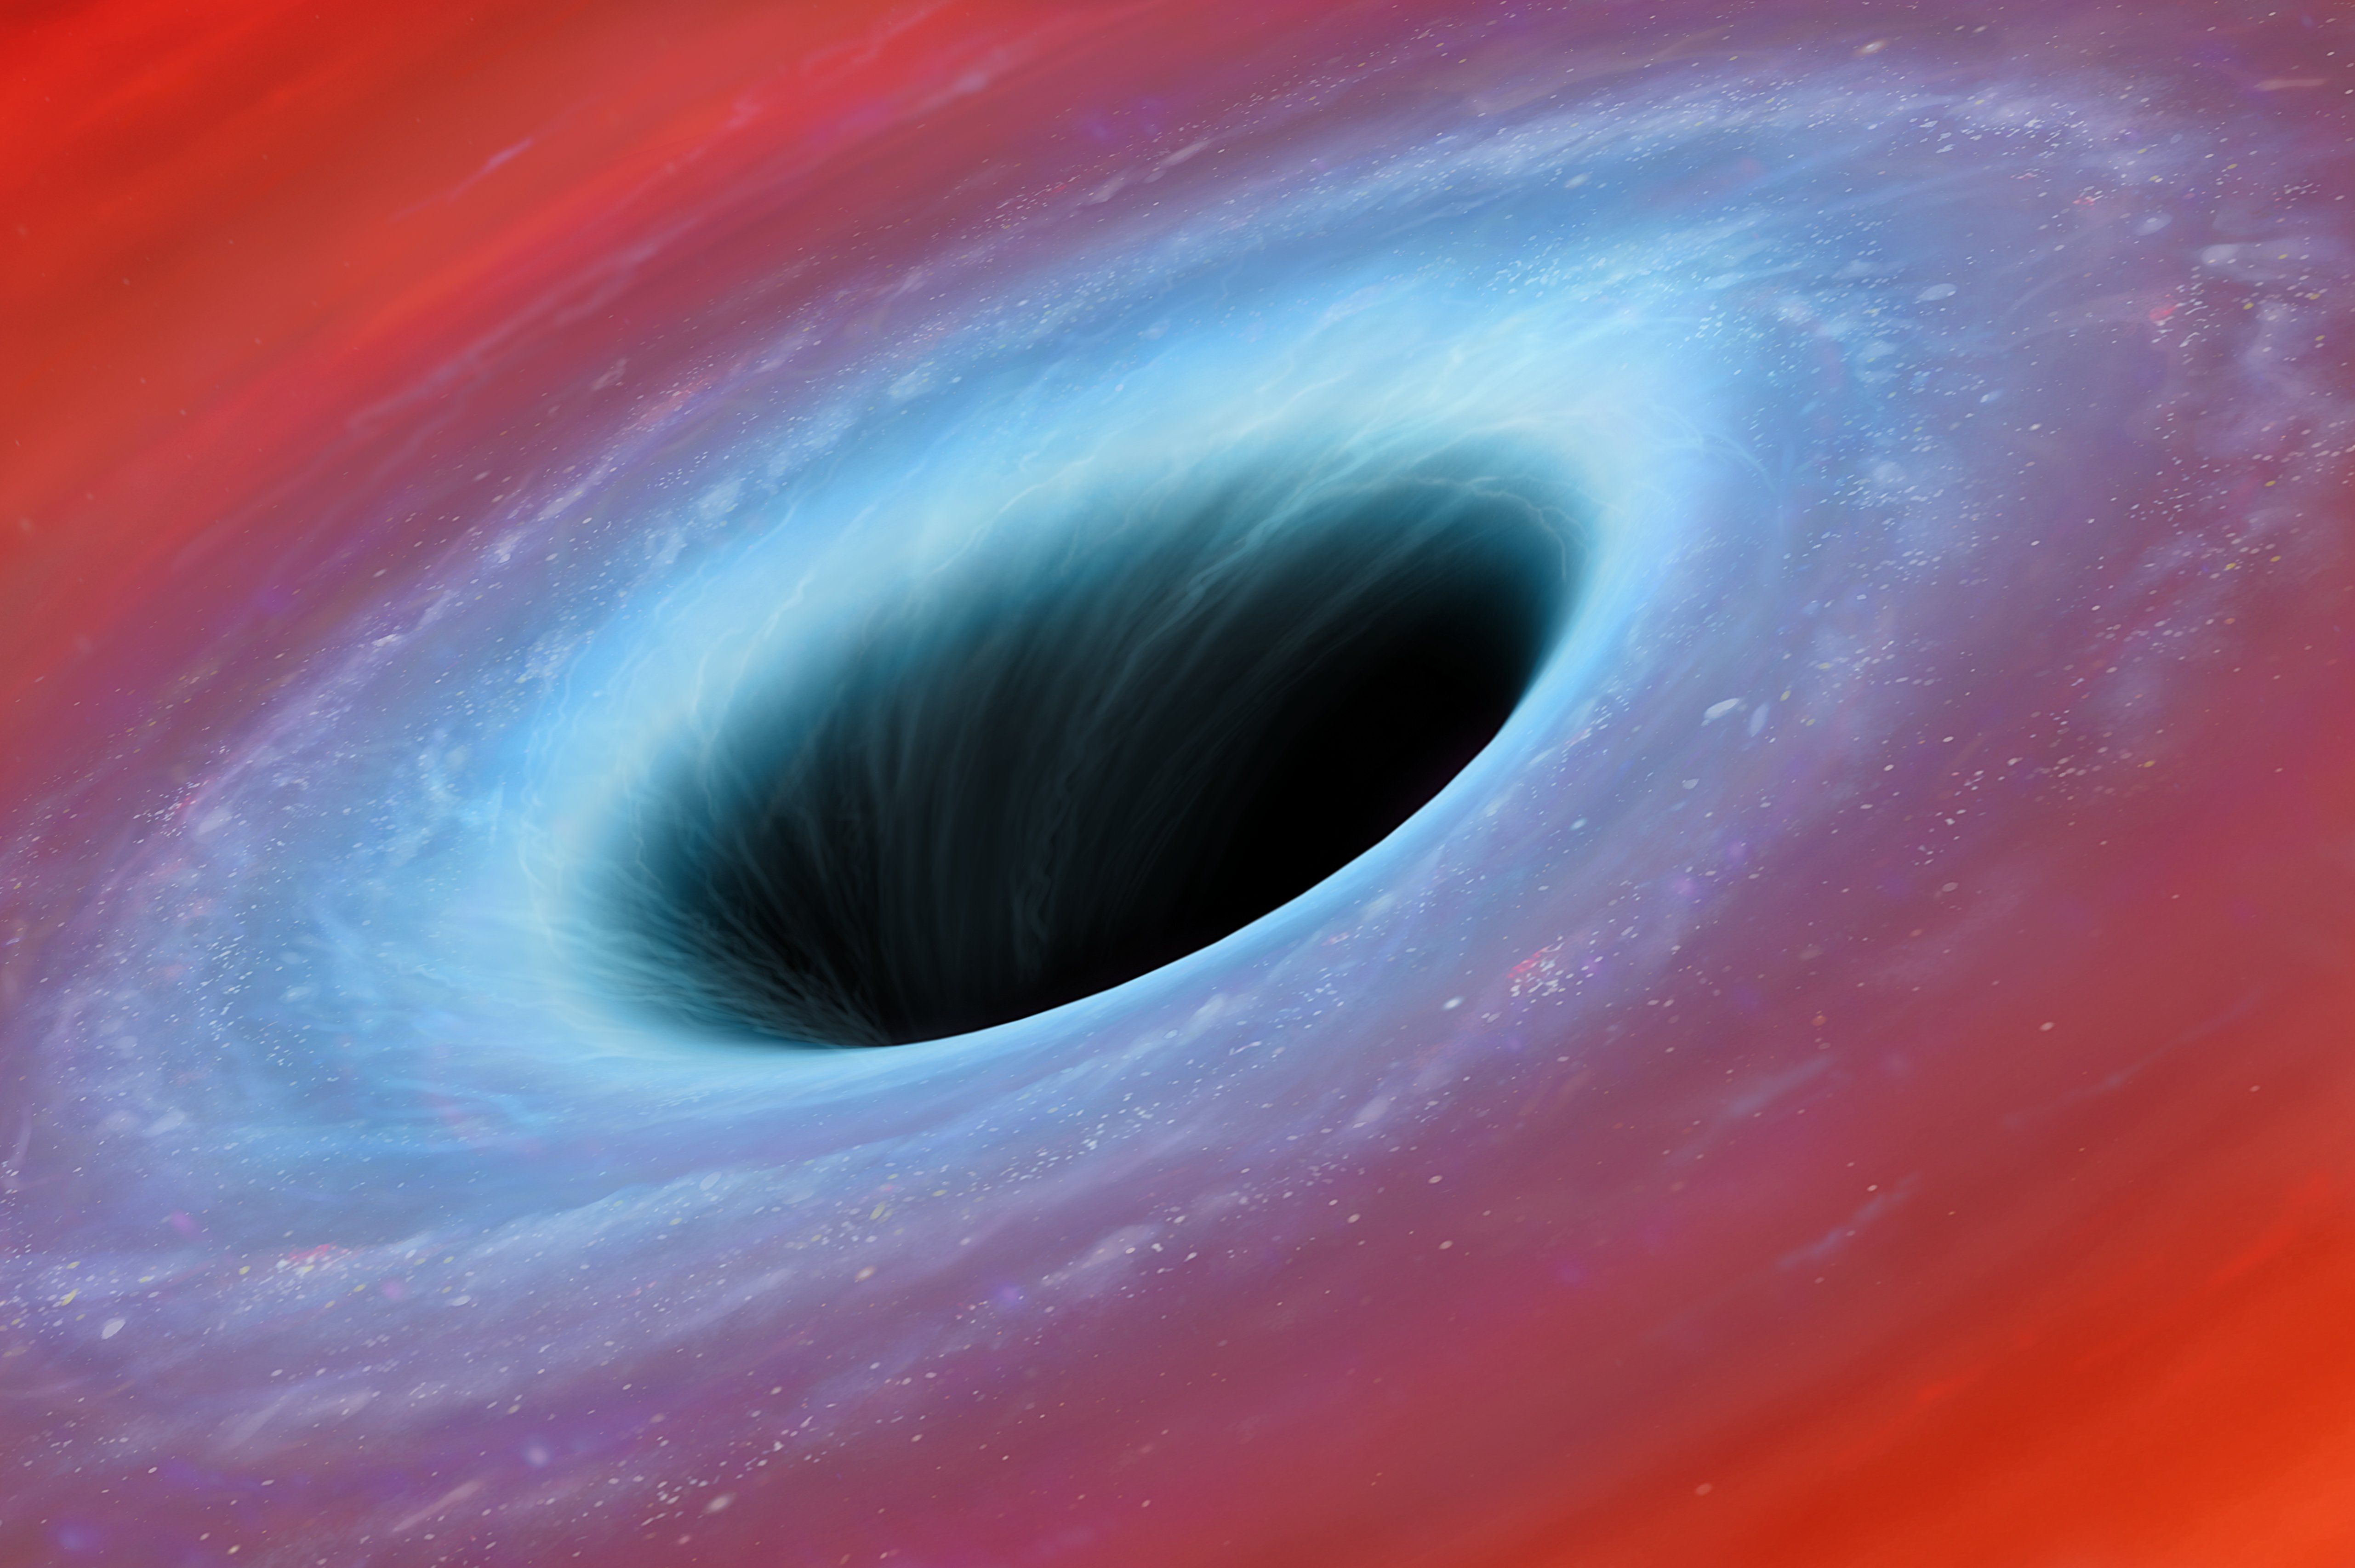 Astronomers Just Discovered the Closest Black Hole to Earth